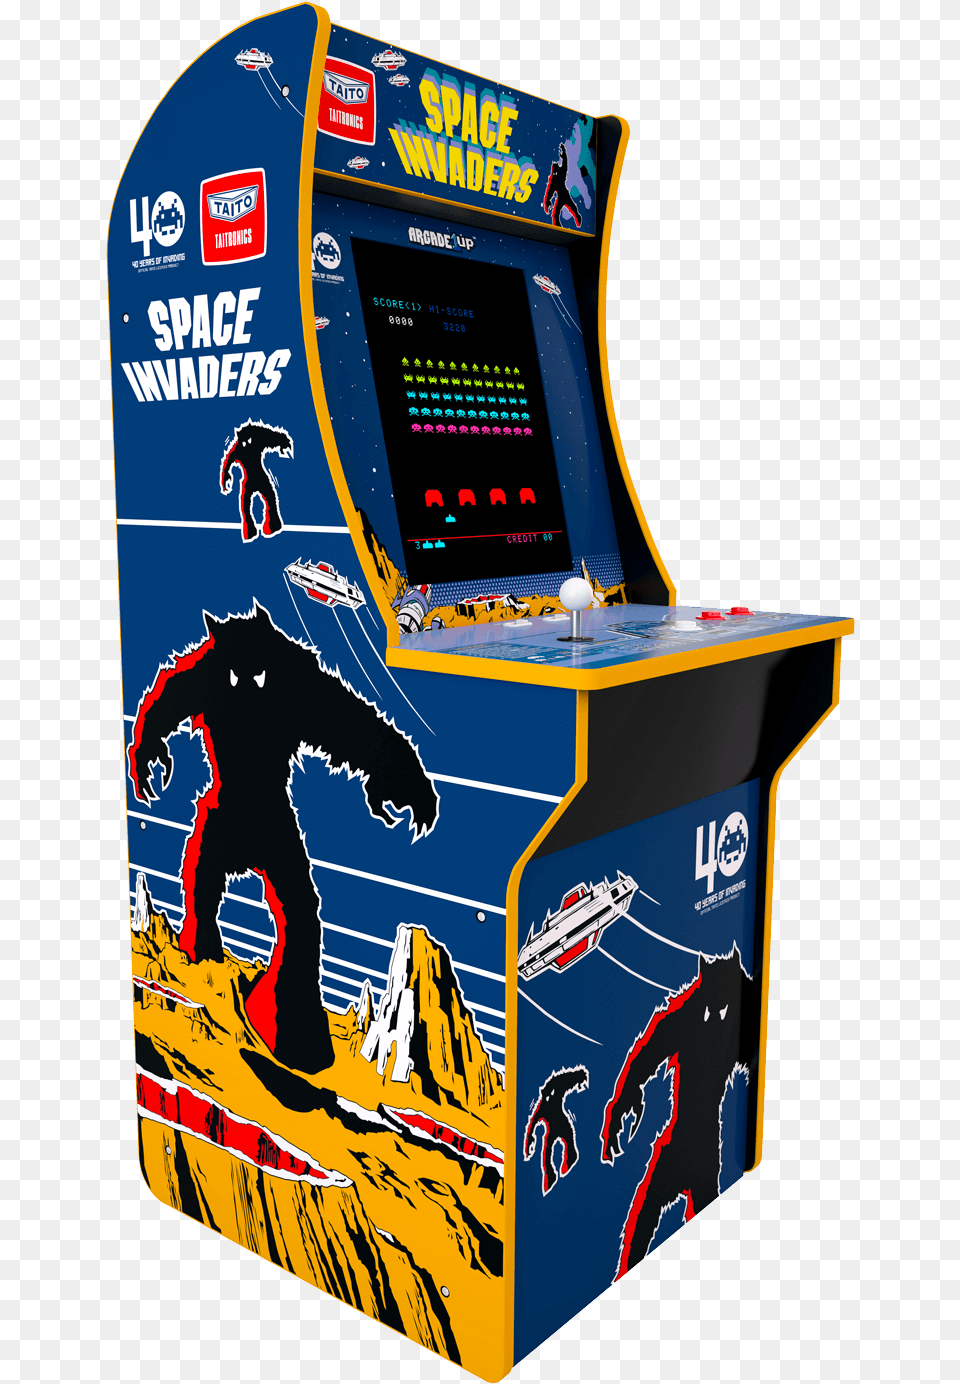 Space Invaders Arcade Cabinetclass Lazyload Lazyload 1up Arcade Space Invaders, Arcade Game Machine, Game, Person, Adult Png Image